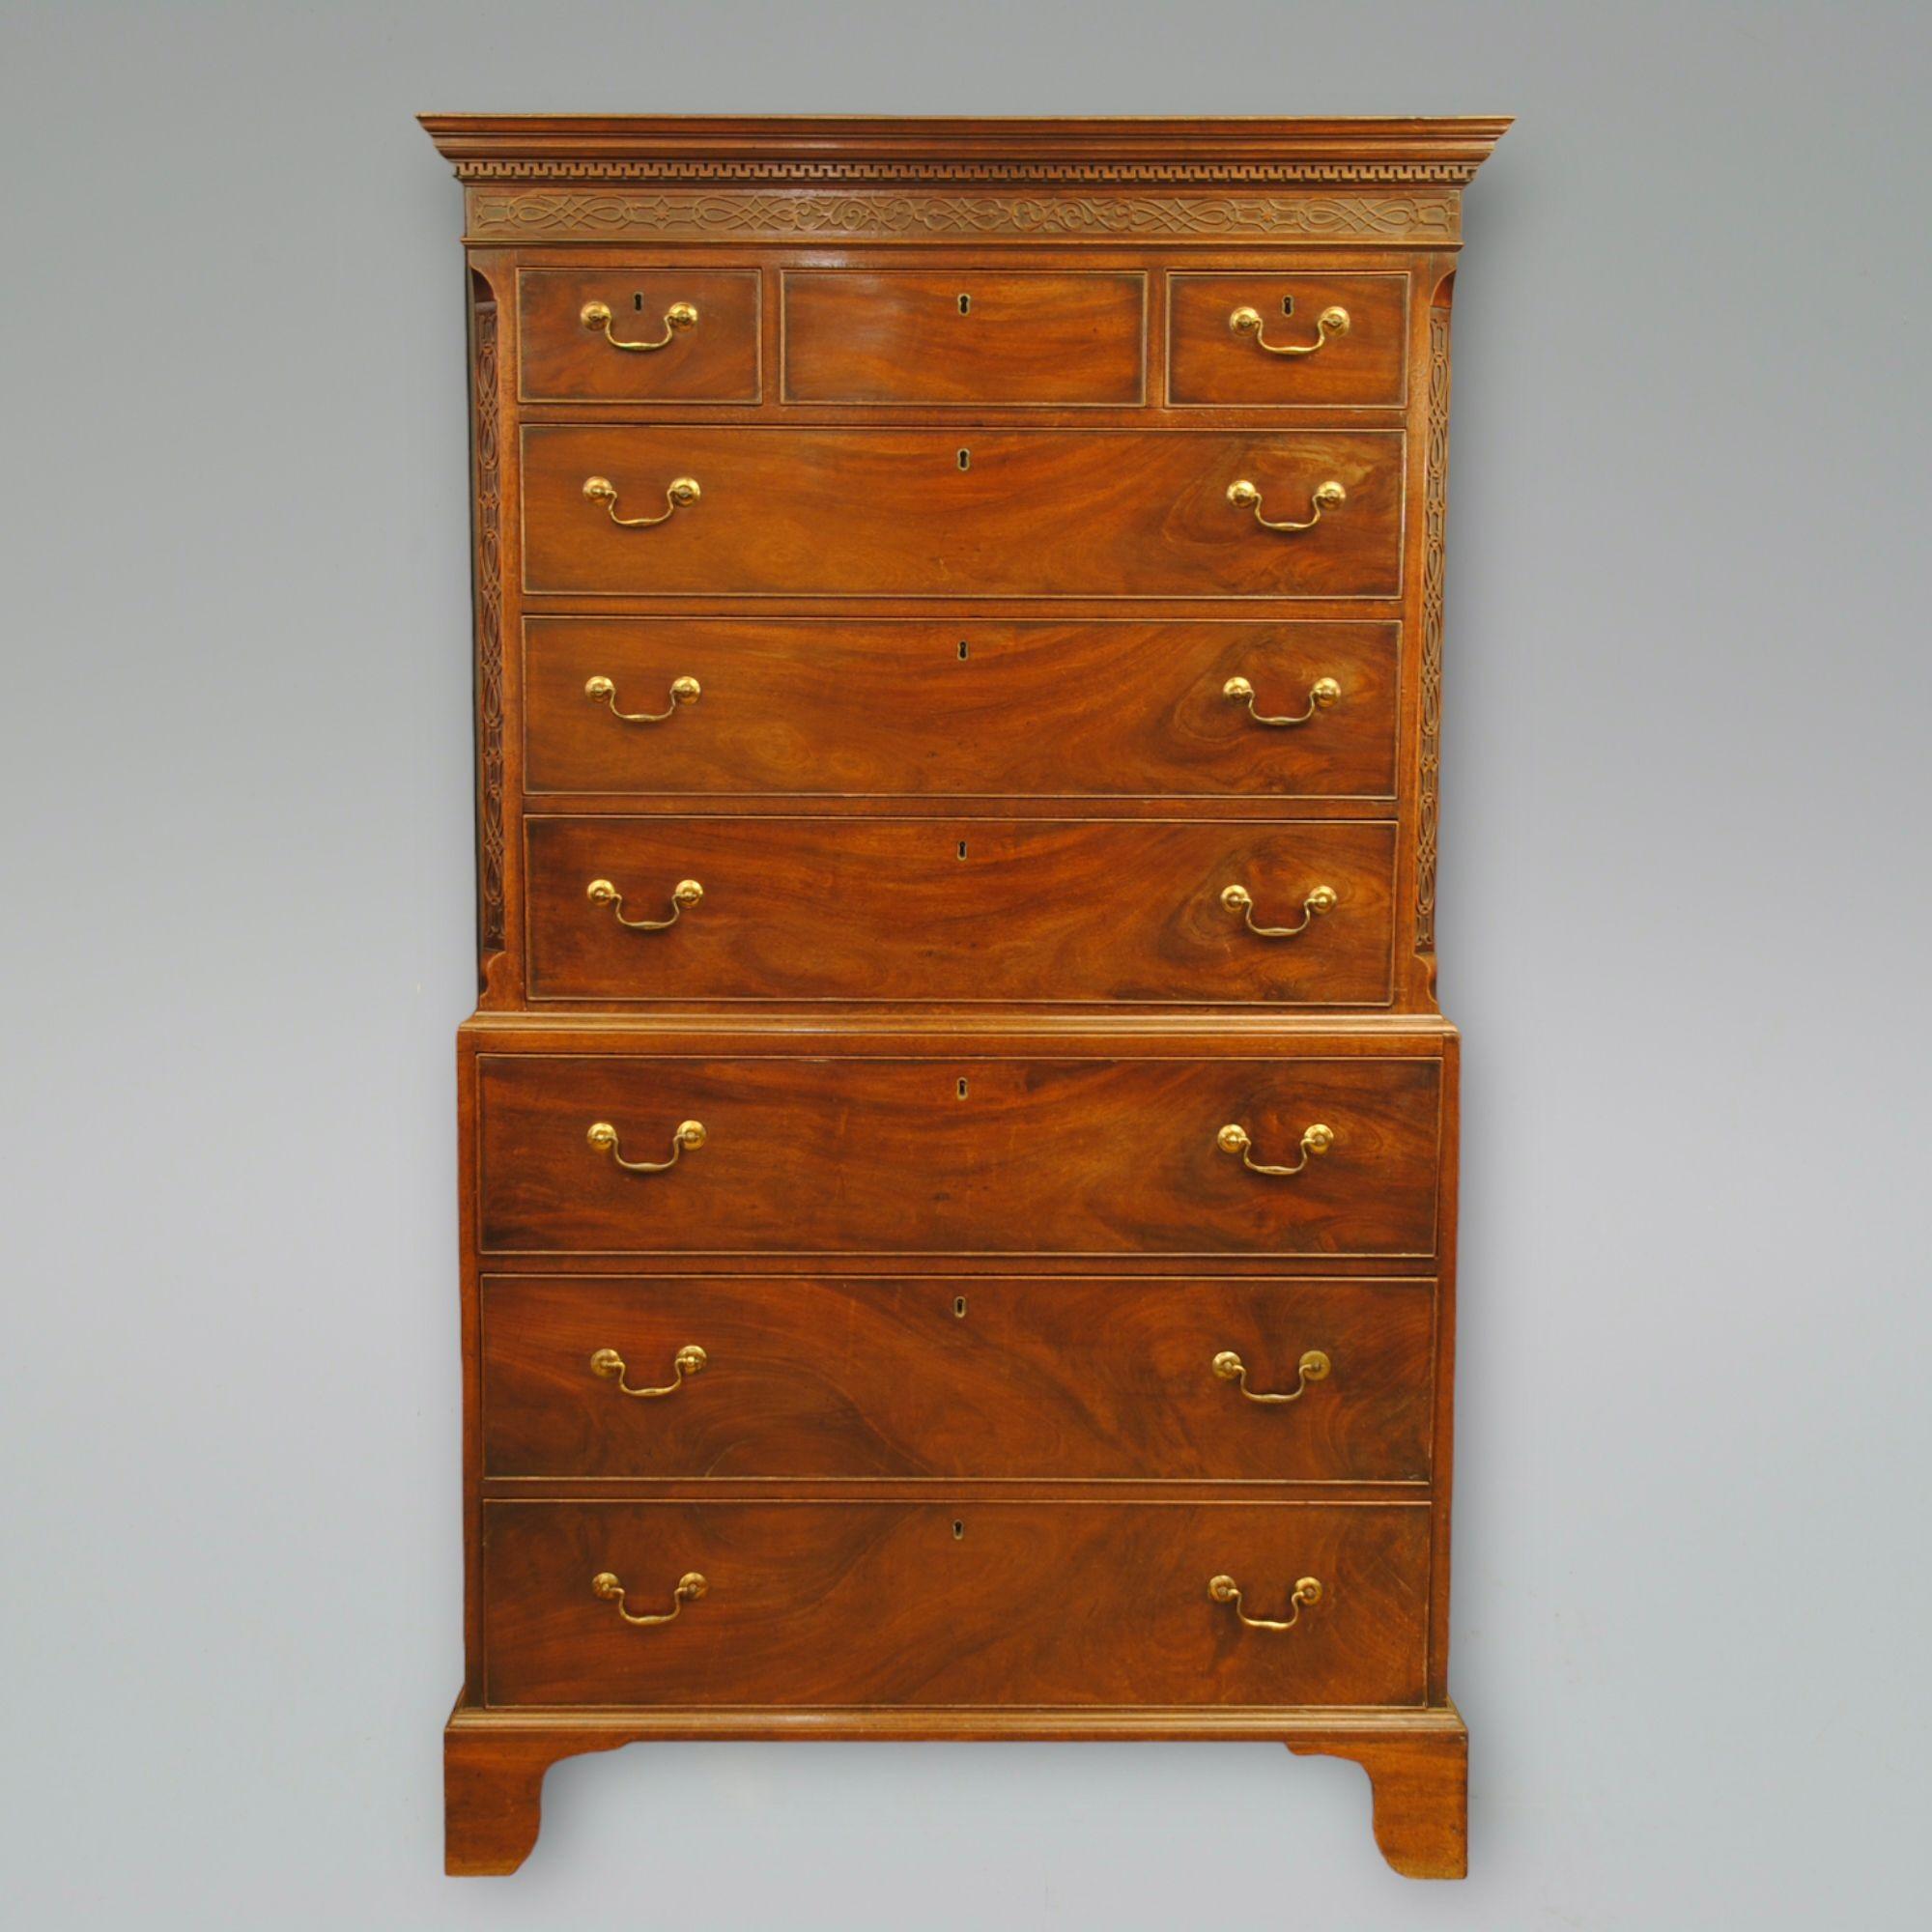 A George III period mahogany tallboy with blind fret decoration to the frieze below the cornice and on the canted corners. Original swanneck brass handles and lovely grain on the drawer fronts. 
Superb colour and patiation.
Circa 1775